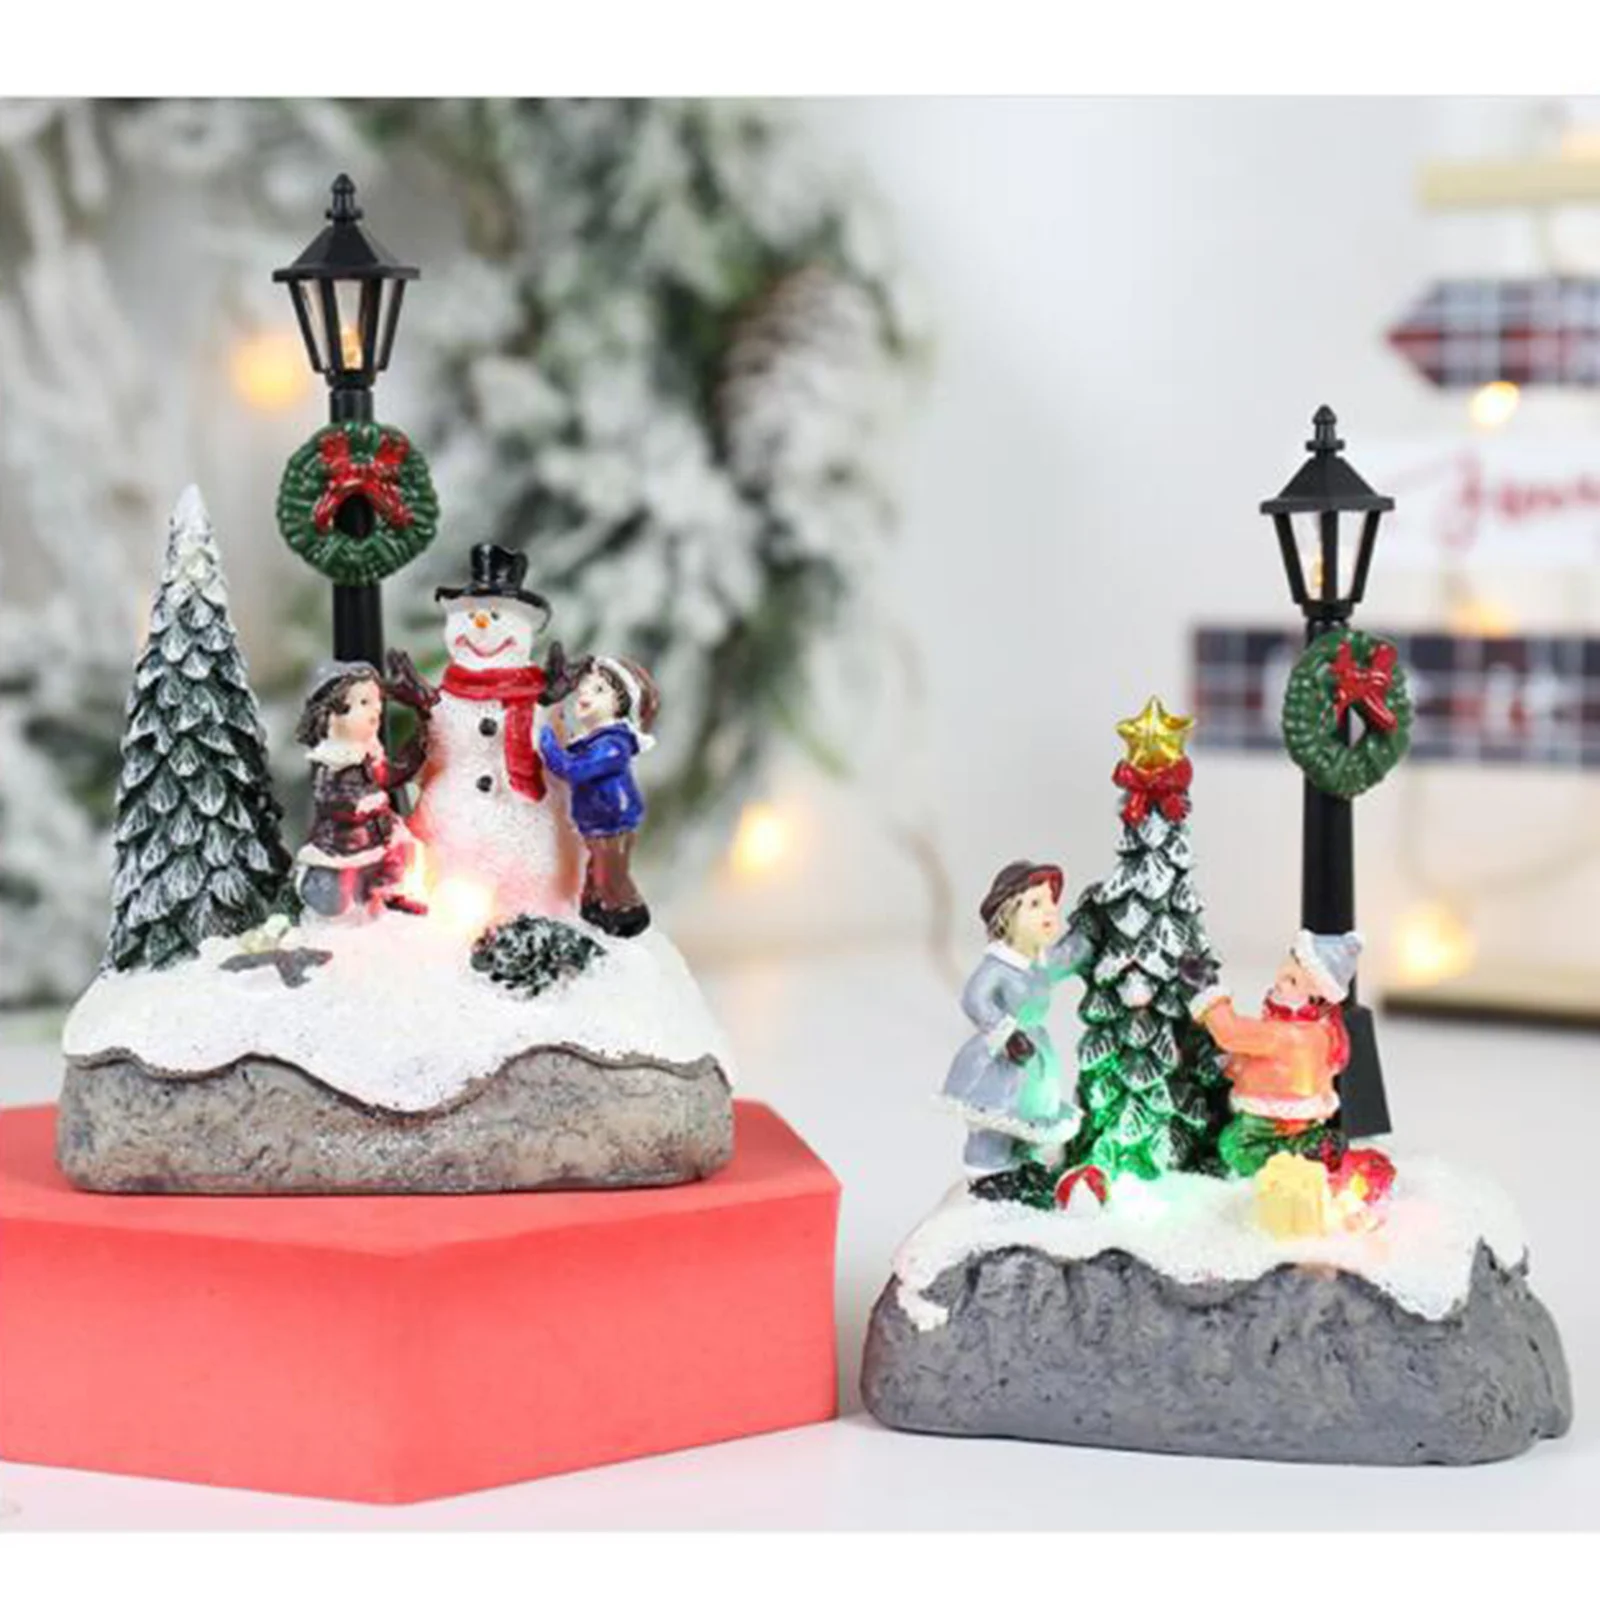 Christmas Scene Village Houses Indoor Outdoor with LED Light Christmas Village Sets Micro Landscape for Christmas Decorations 